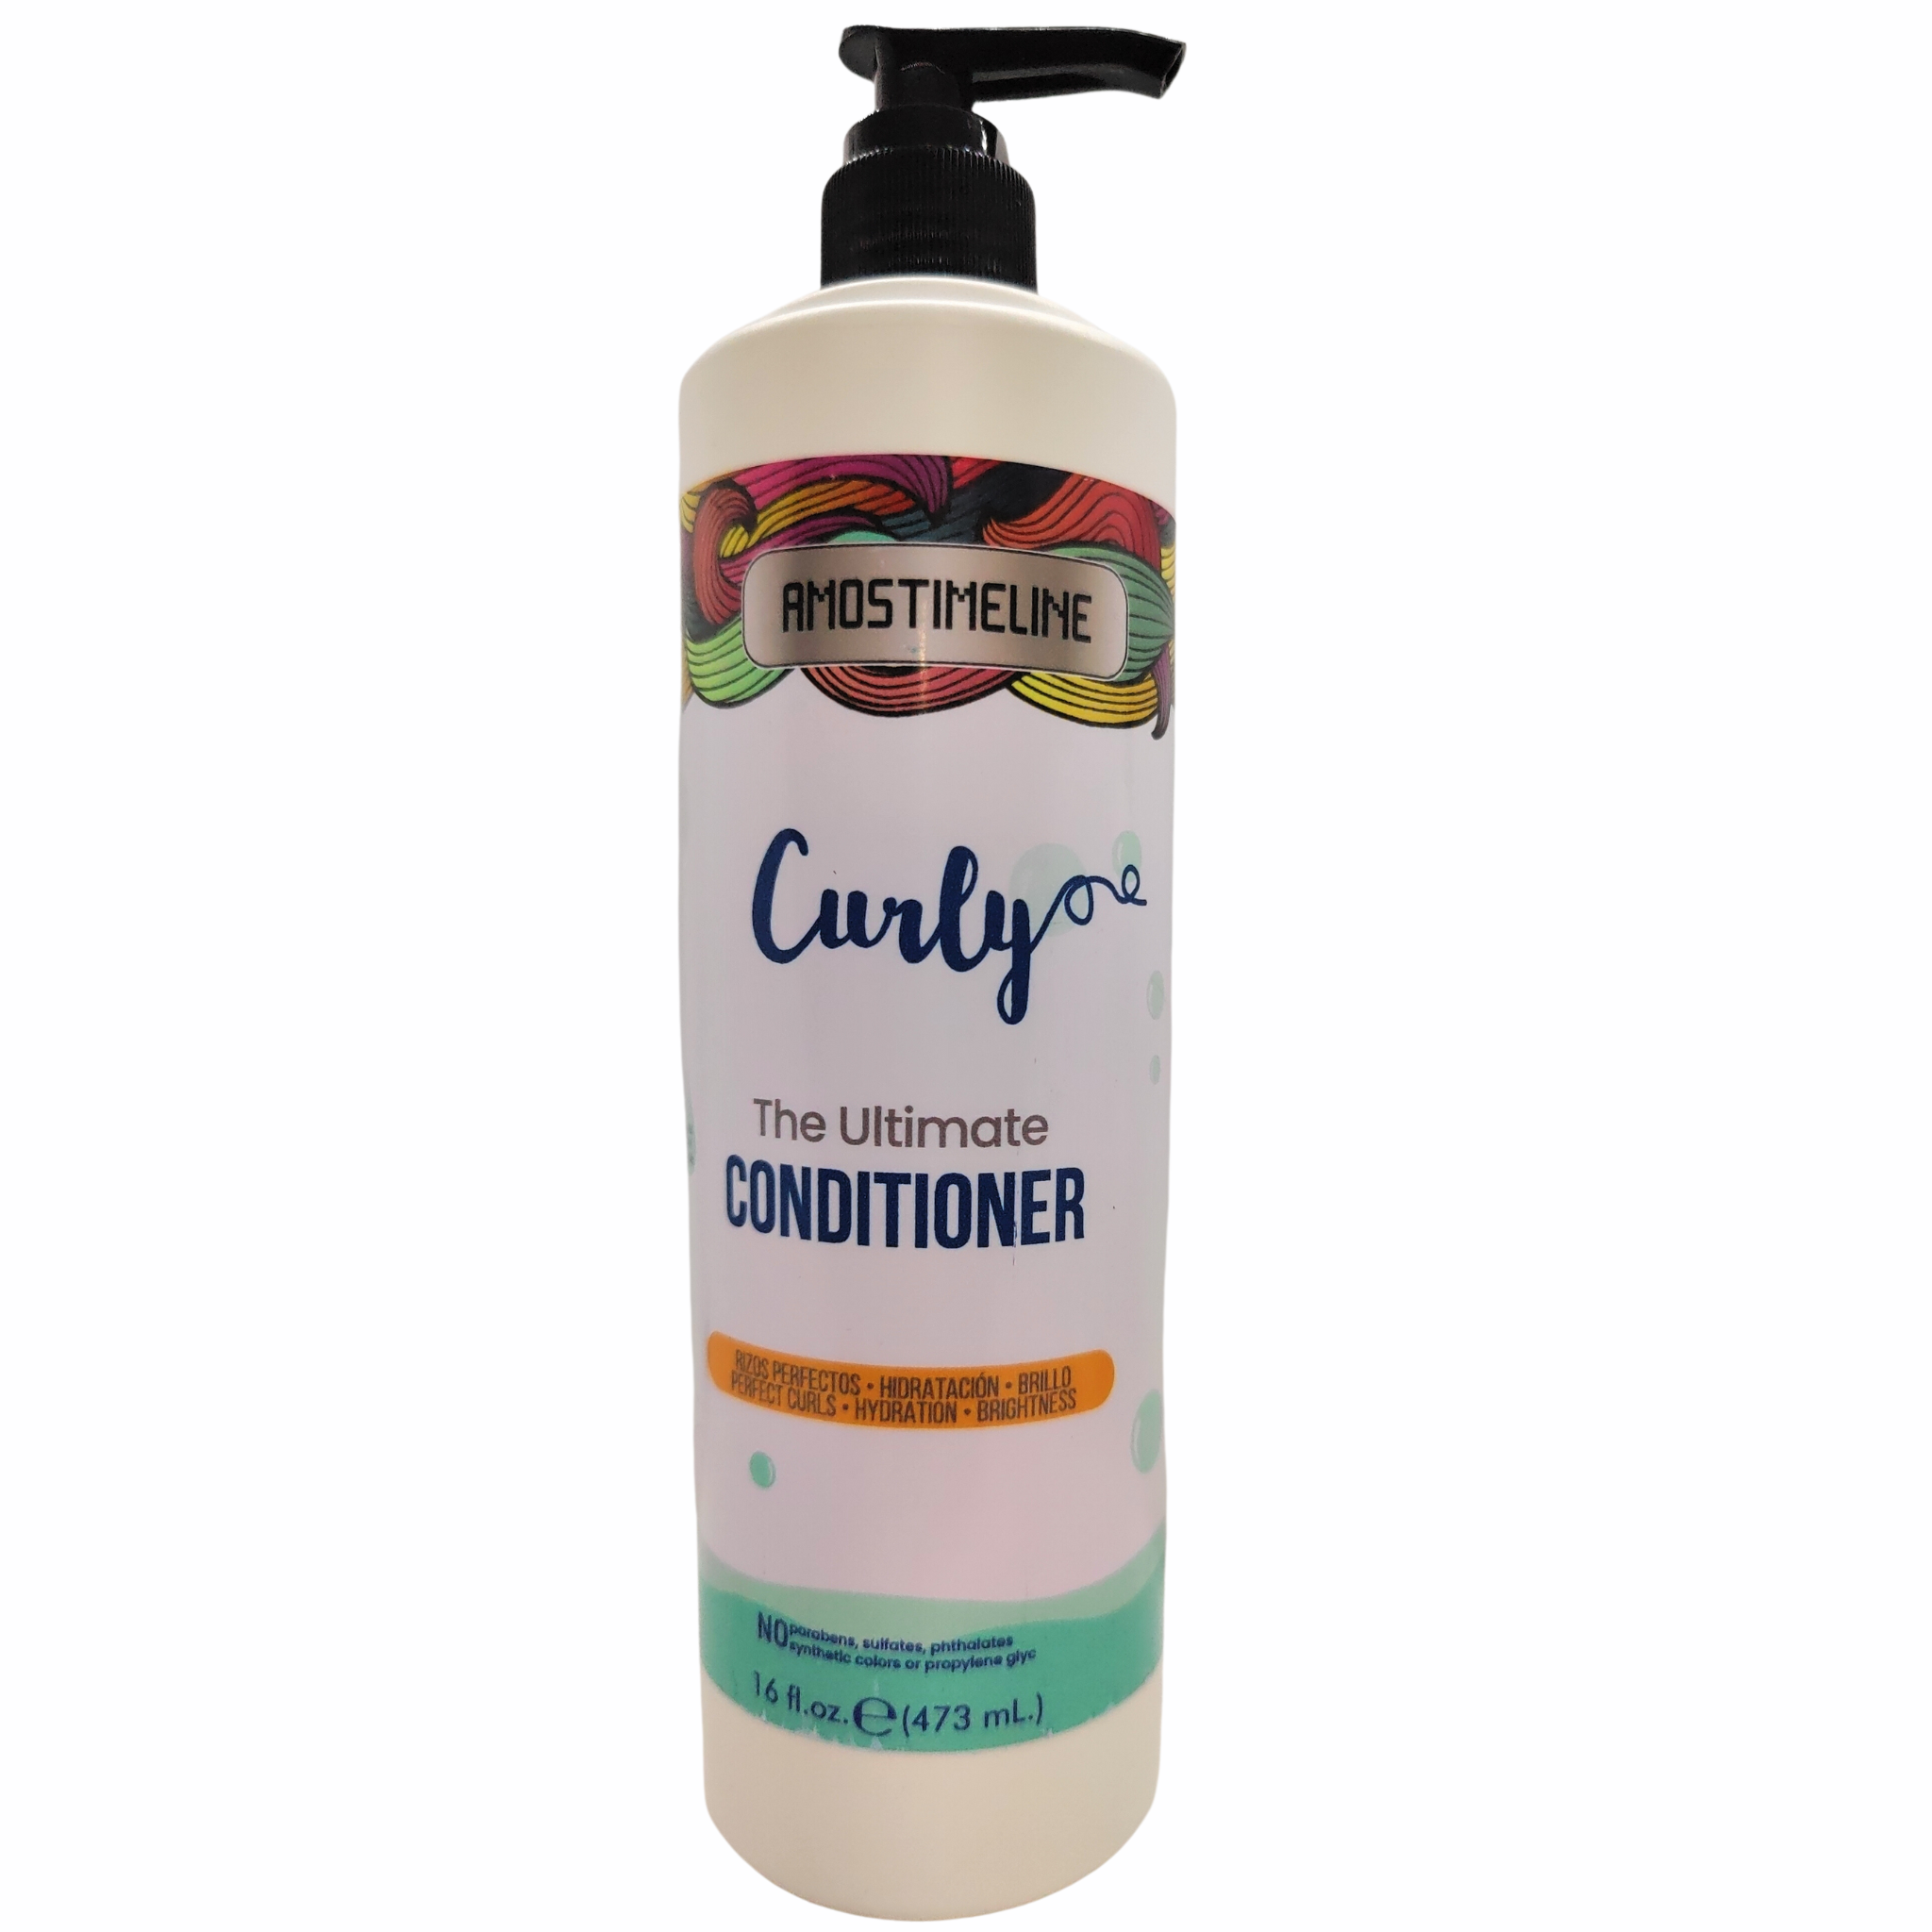 Moisturizing conditioner for curly hair 16 oz